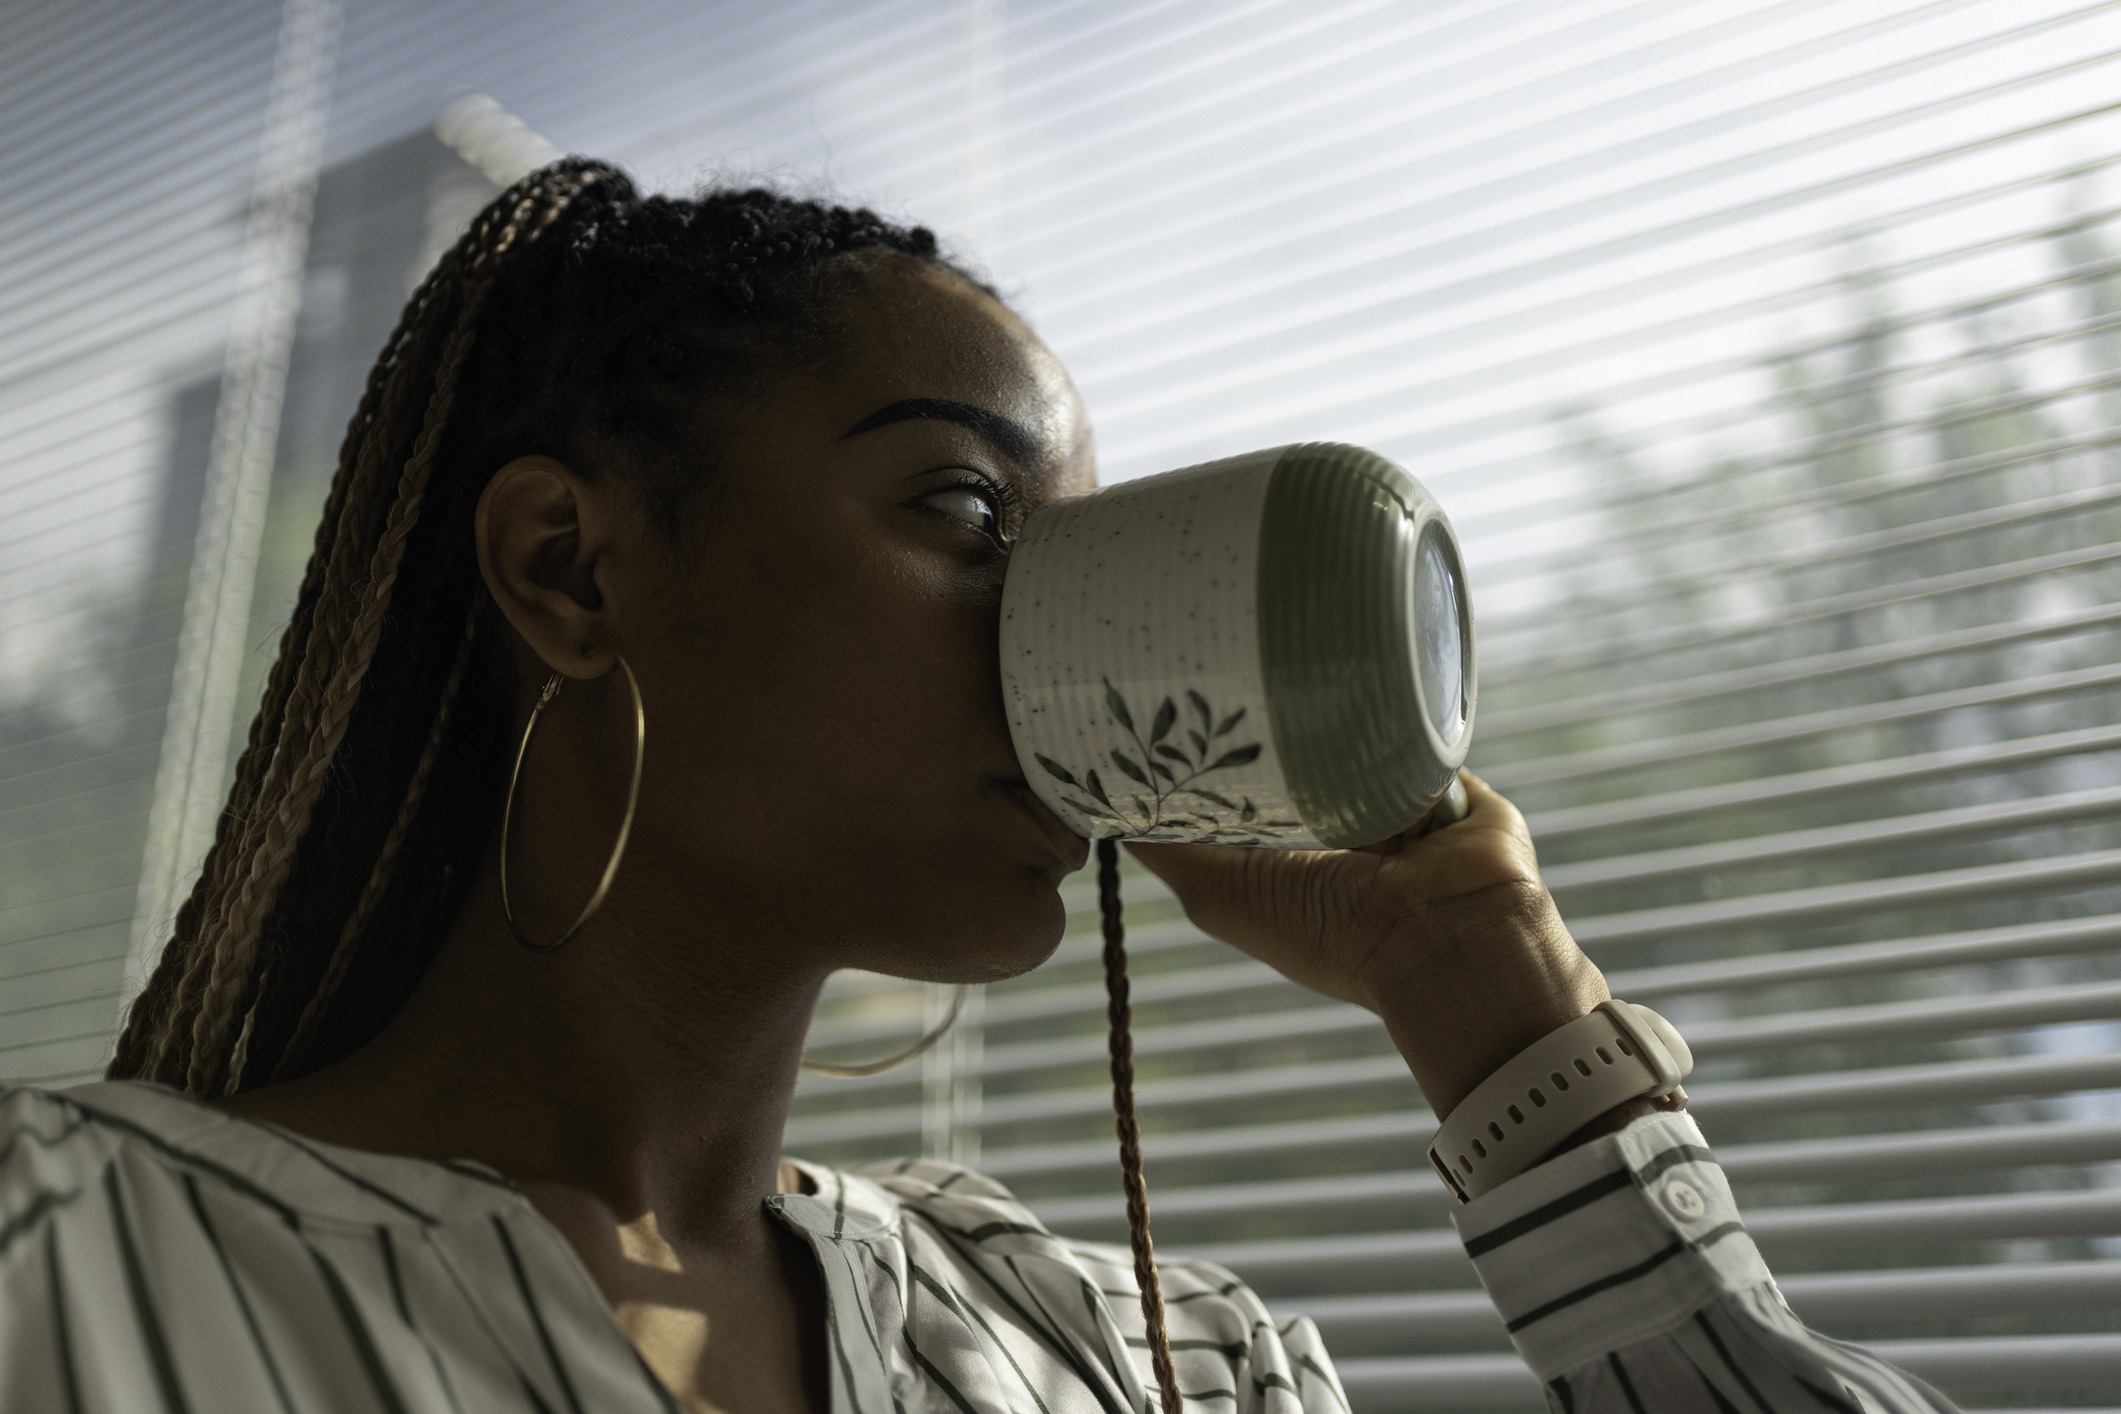 A young Black woman drinking out of a coffee cup while looking out a window